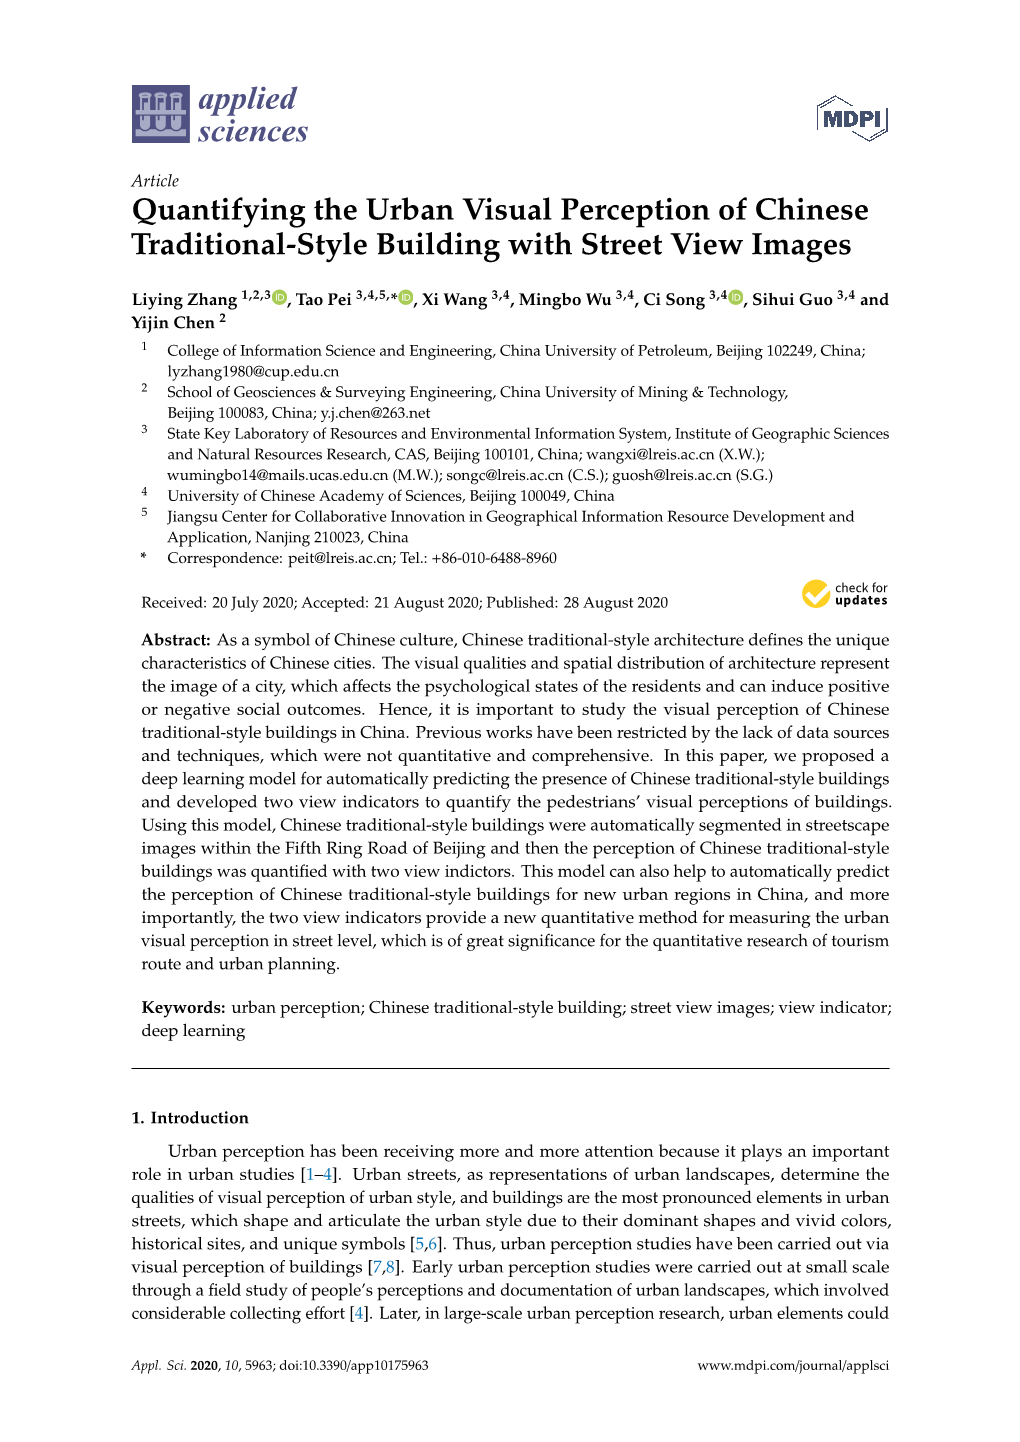 Quantifying the Urban Visual Perception of Chinese Traditional-Style Building with Street View Images